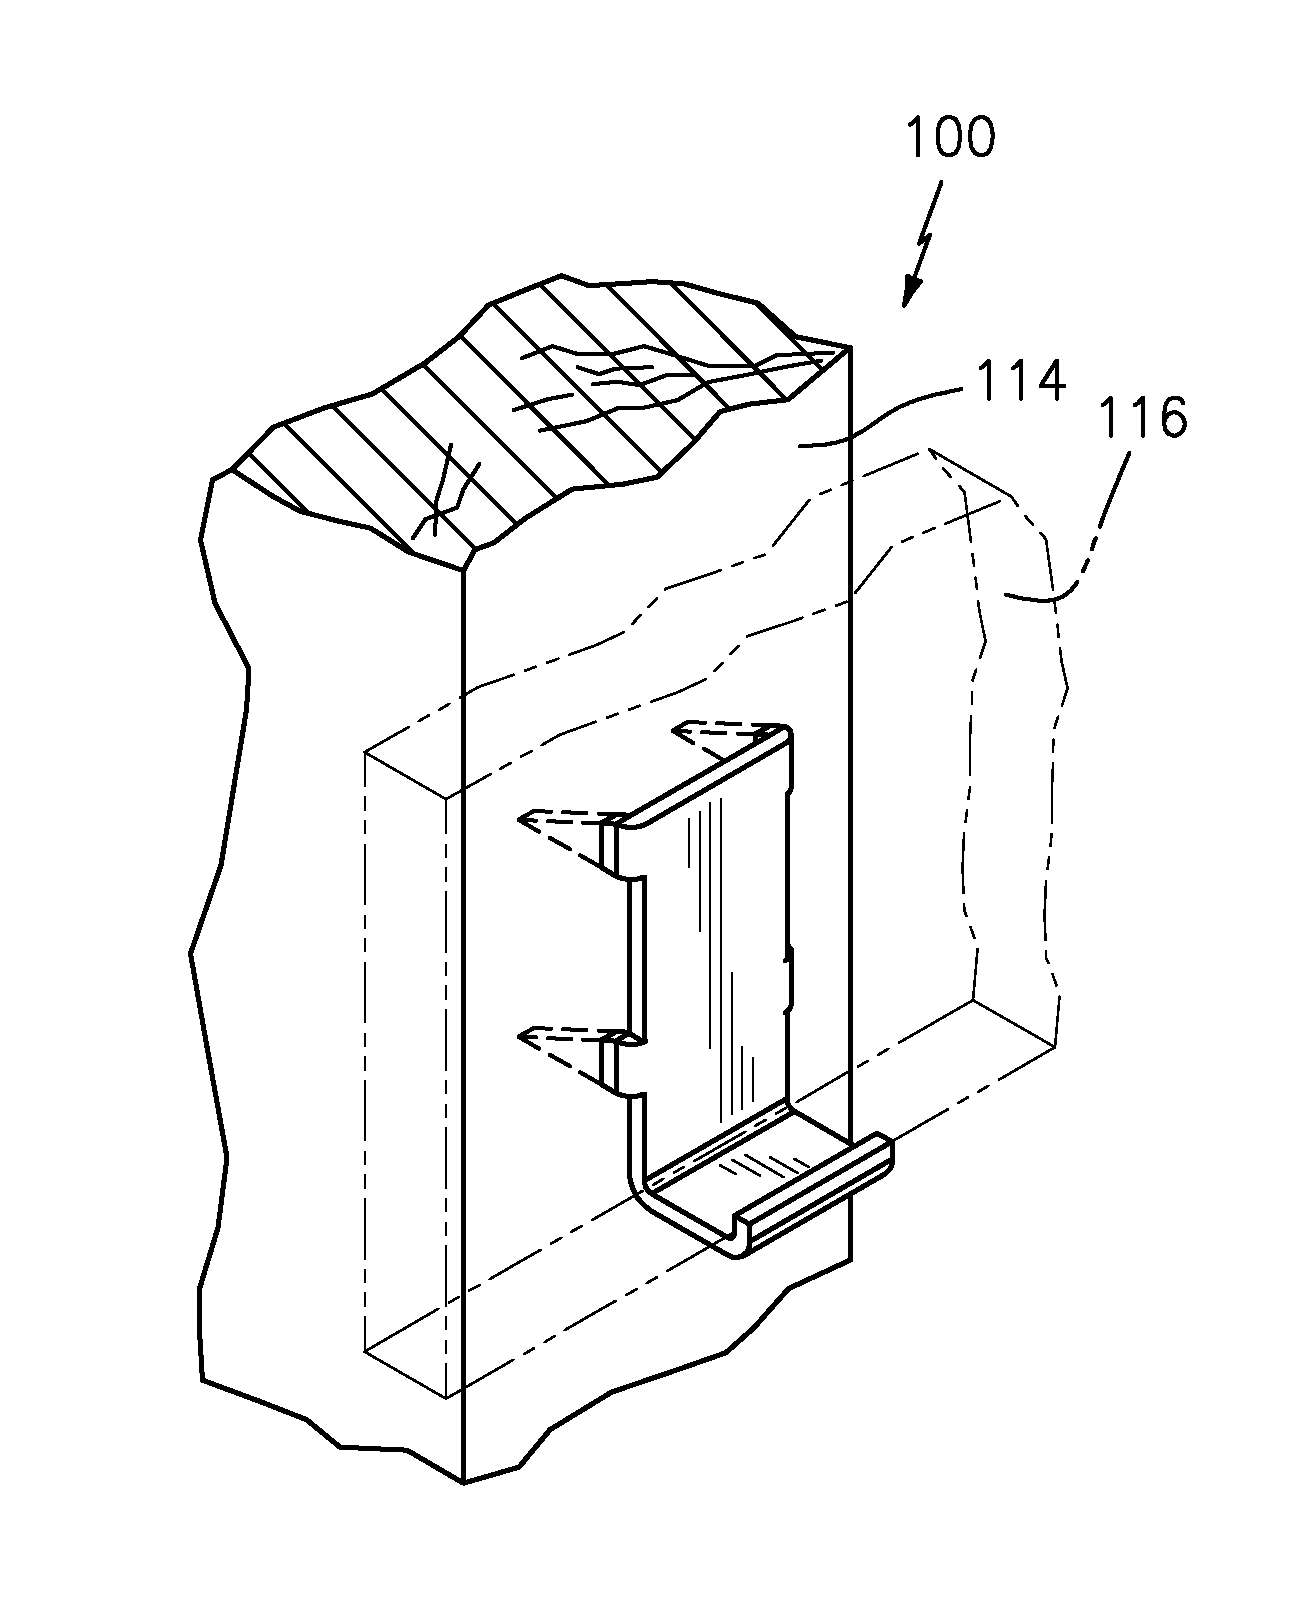 Method of supporting drywall